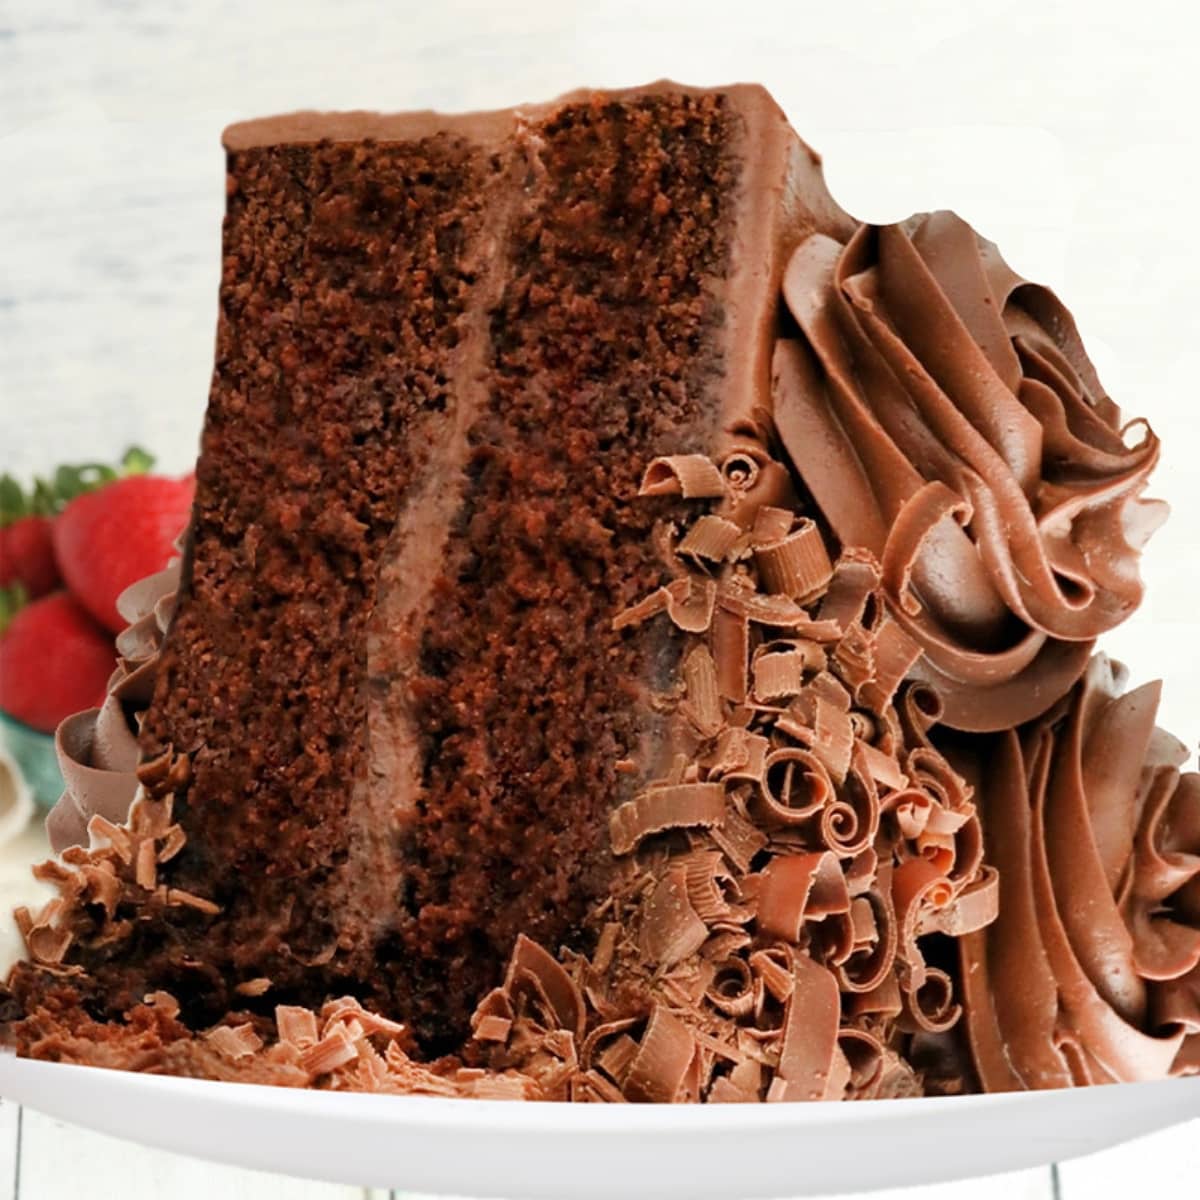 Chocolate Cake with Whipped Ganache Frosting Recipe